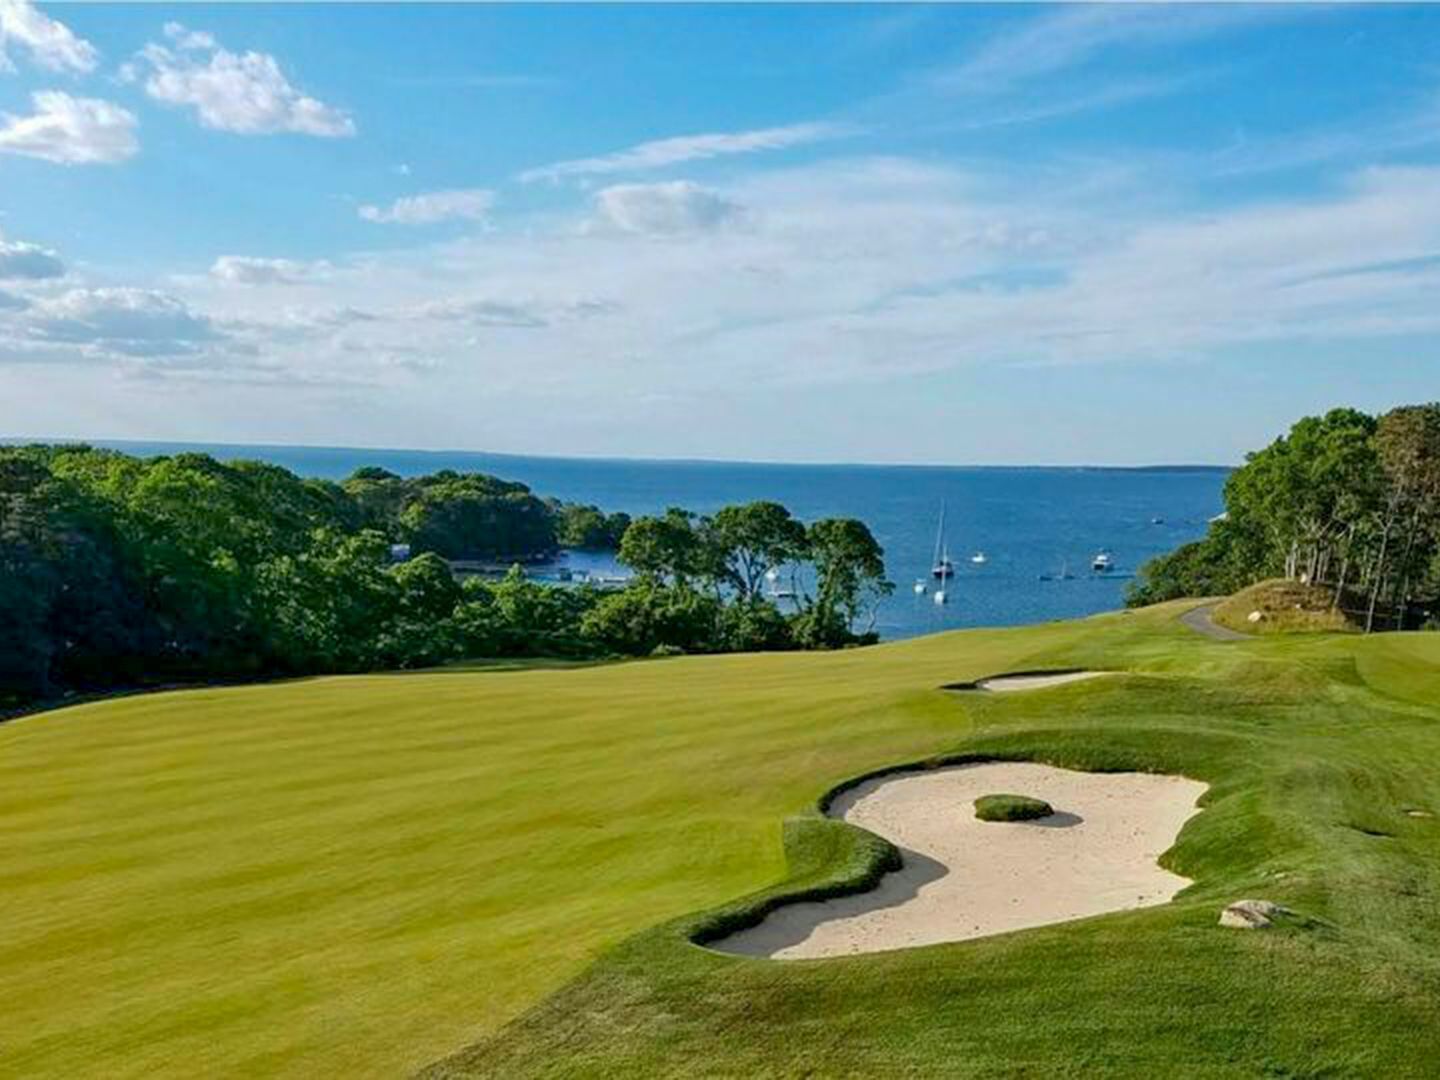 Landscape view of the golf course near Falmouth Tides 